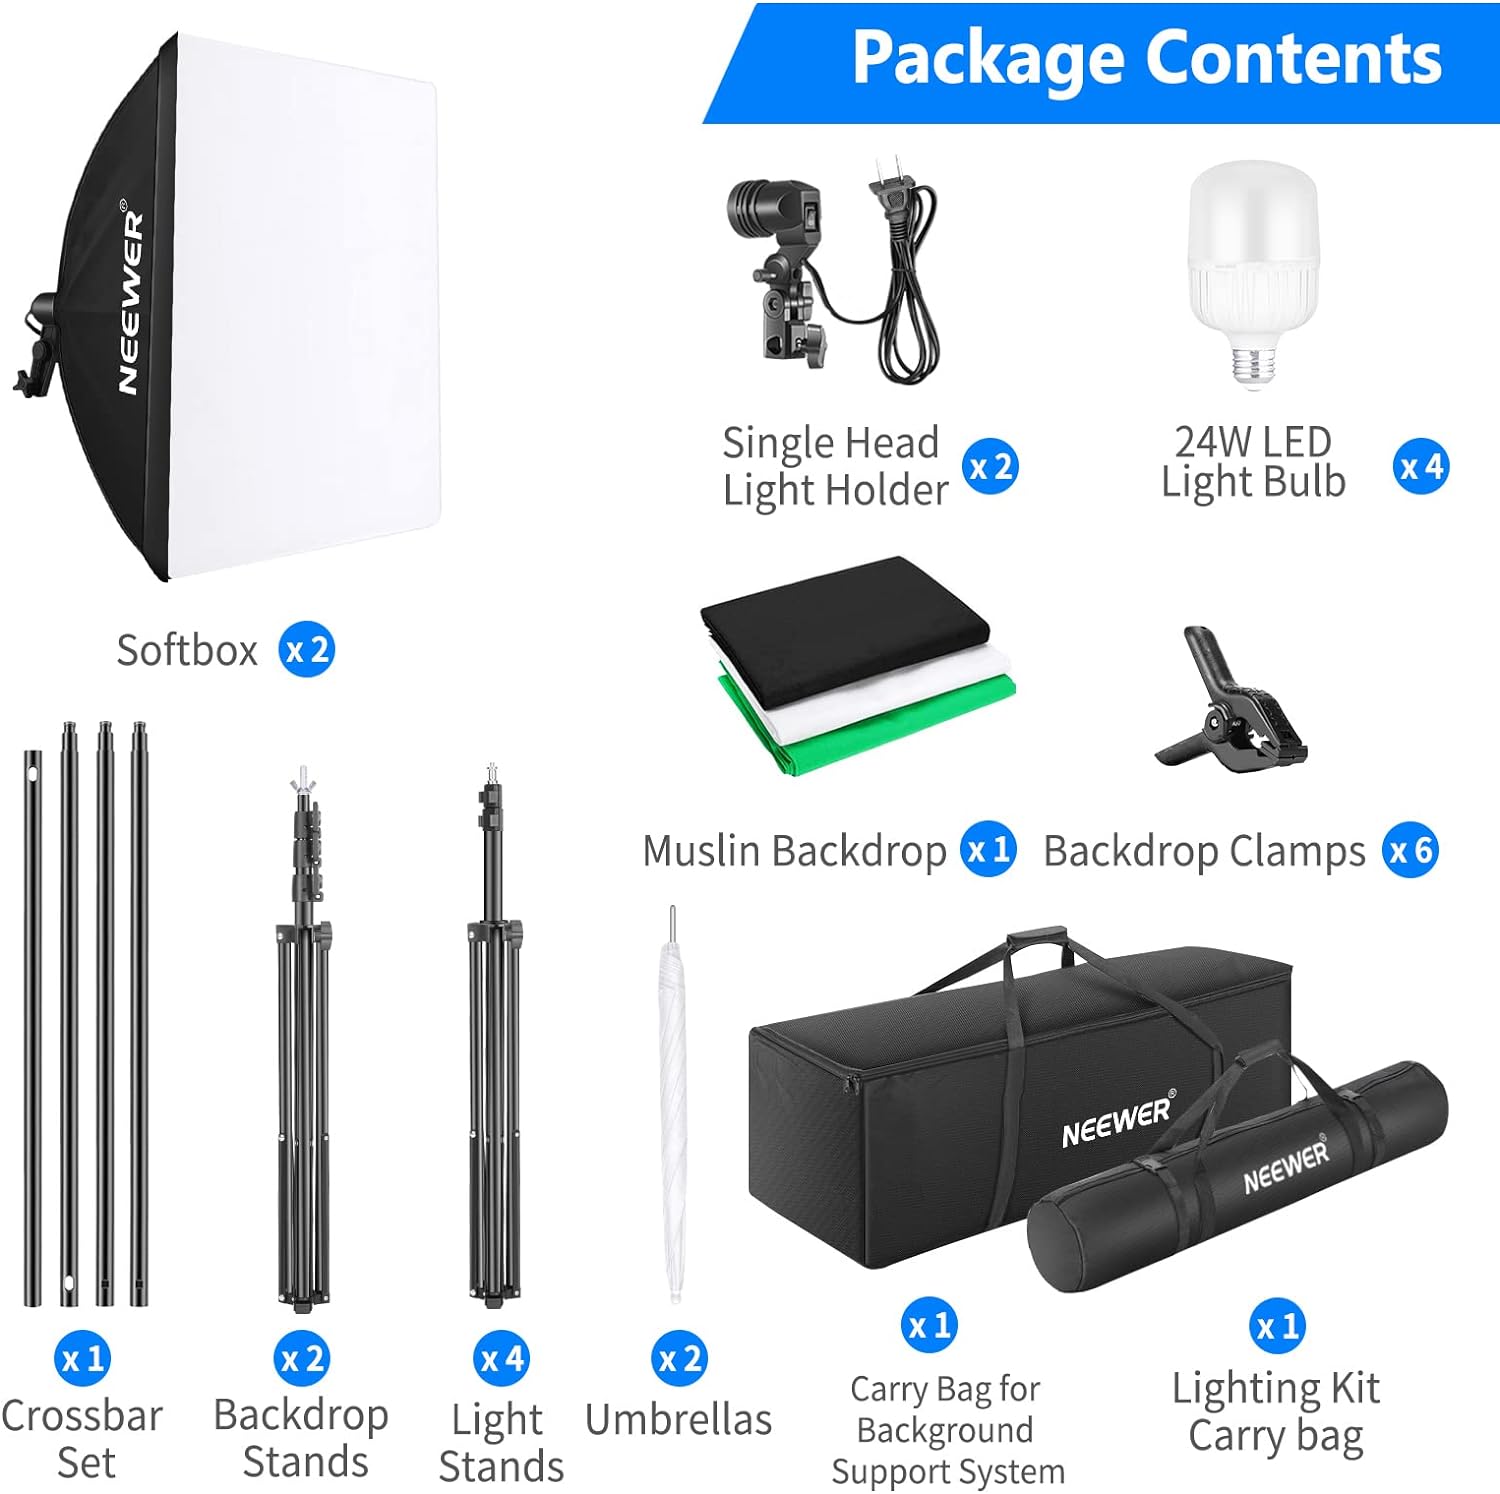 NEEWER Photography Lighting kit with Backdrops, 8.5x10ft Backdrop Stands, UL Certified 5700K 800W Equivalent 24W LED Umbrella Softbox Continuous Lighting, Photo Studio Equipment for Photo Video Shoot